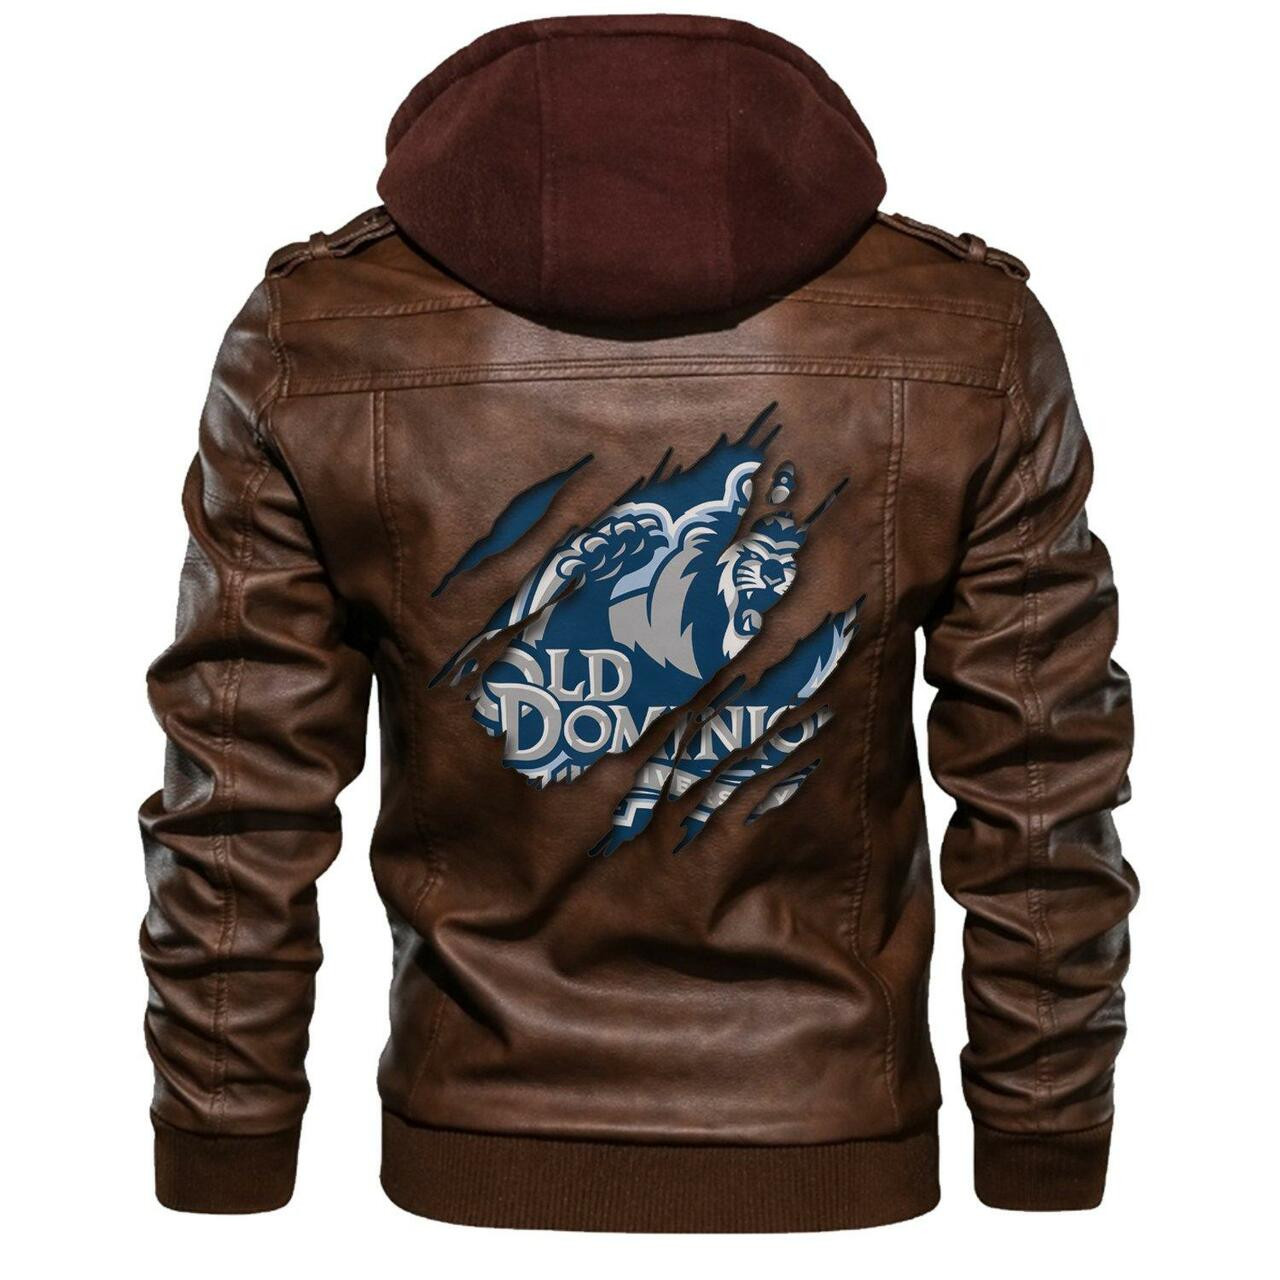 To get a great look, consider purchasing This New Leather Jacket 129